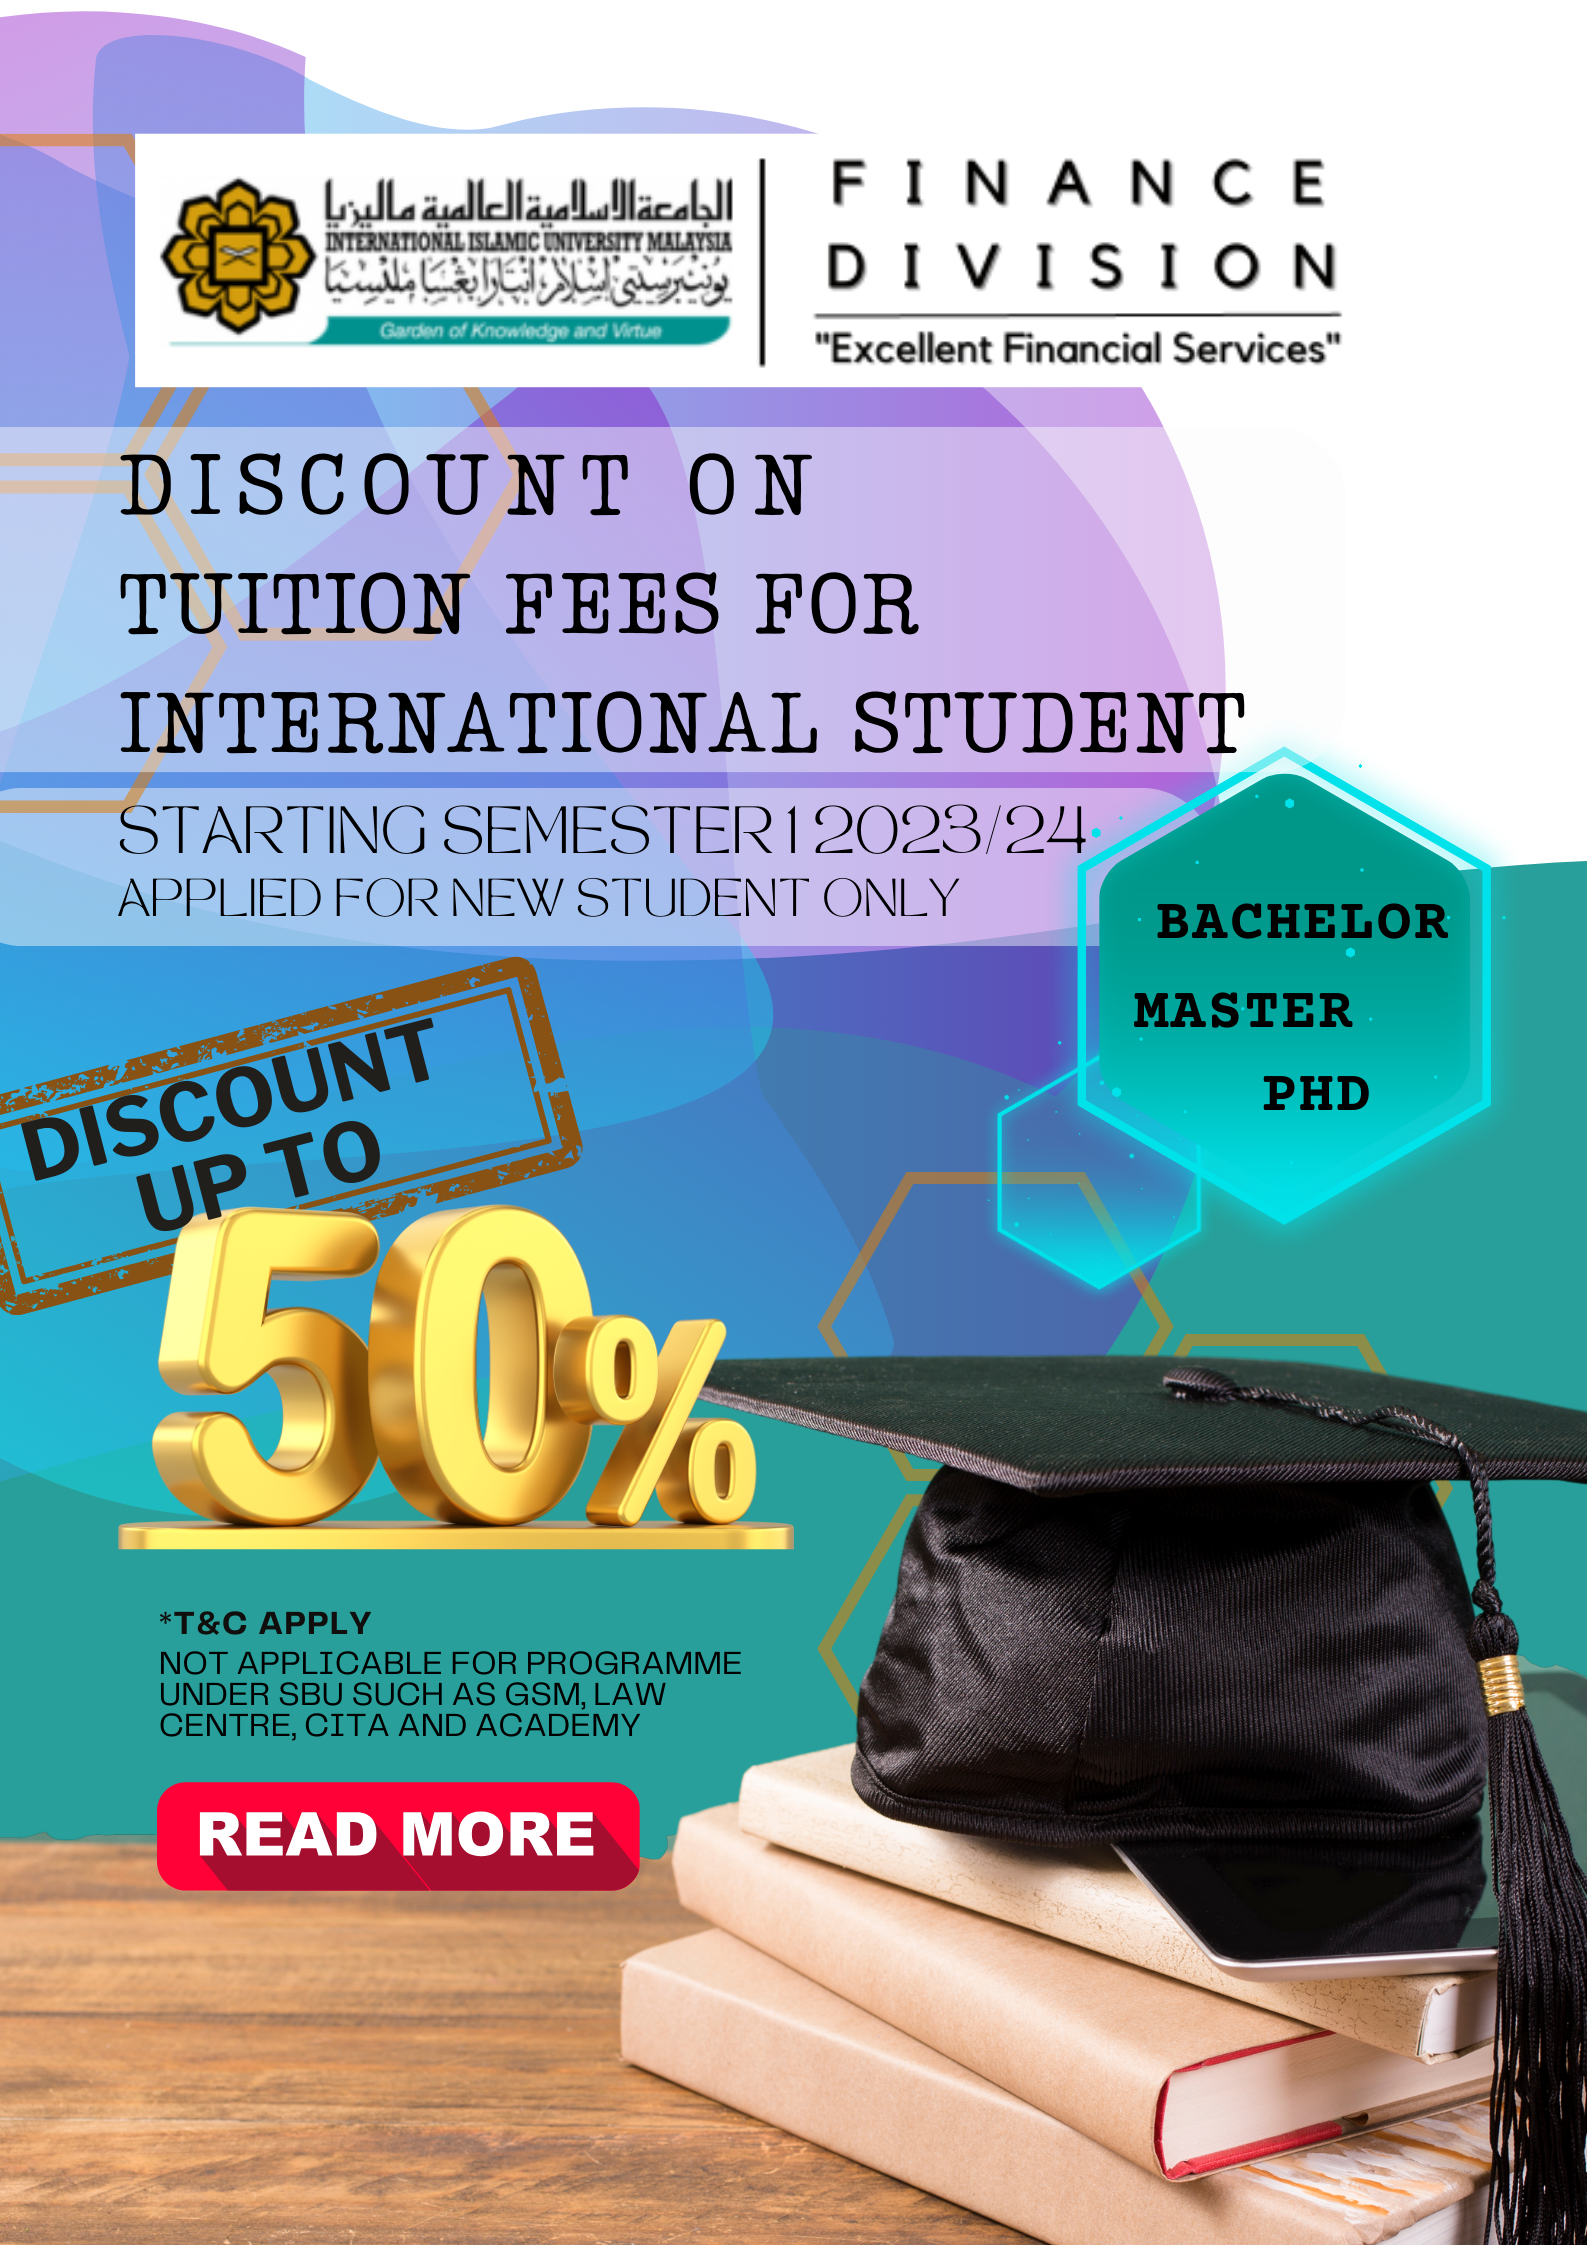 DISCOUNT ON TUITION FEES FOR STUDENT INTERNATIOANL (INTAKE SEMESTER I 2023/24)